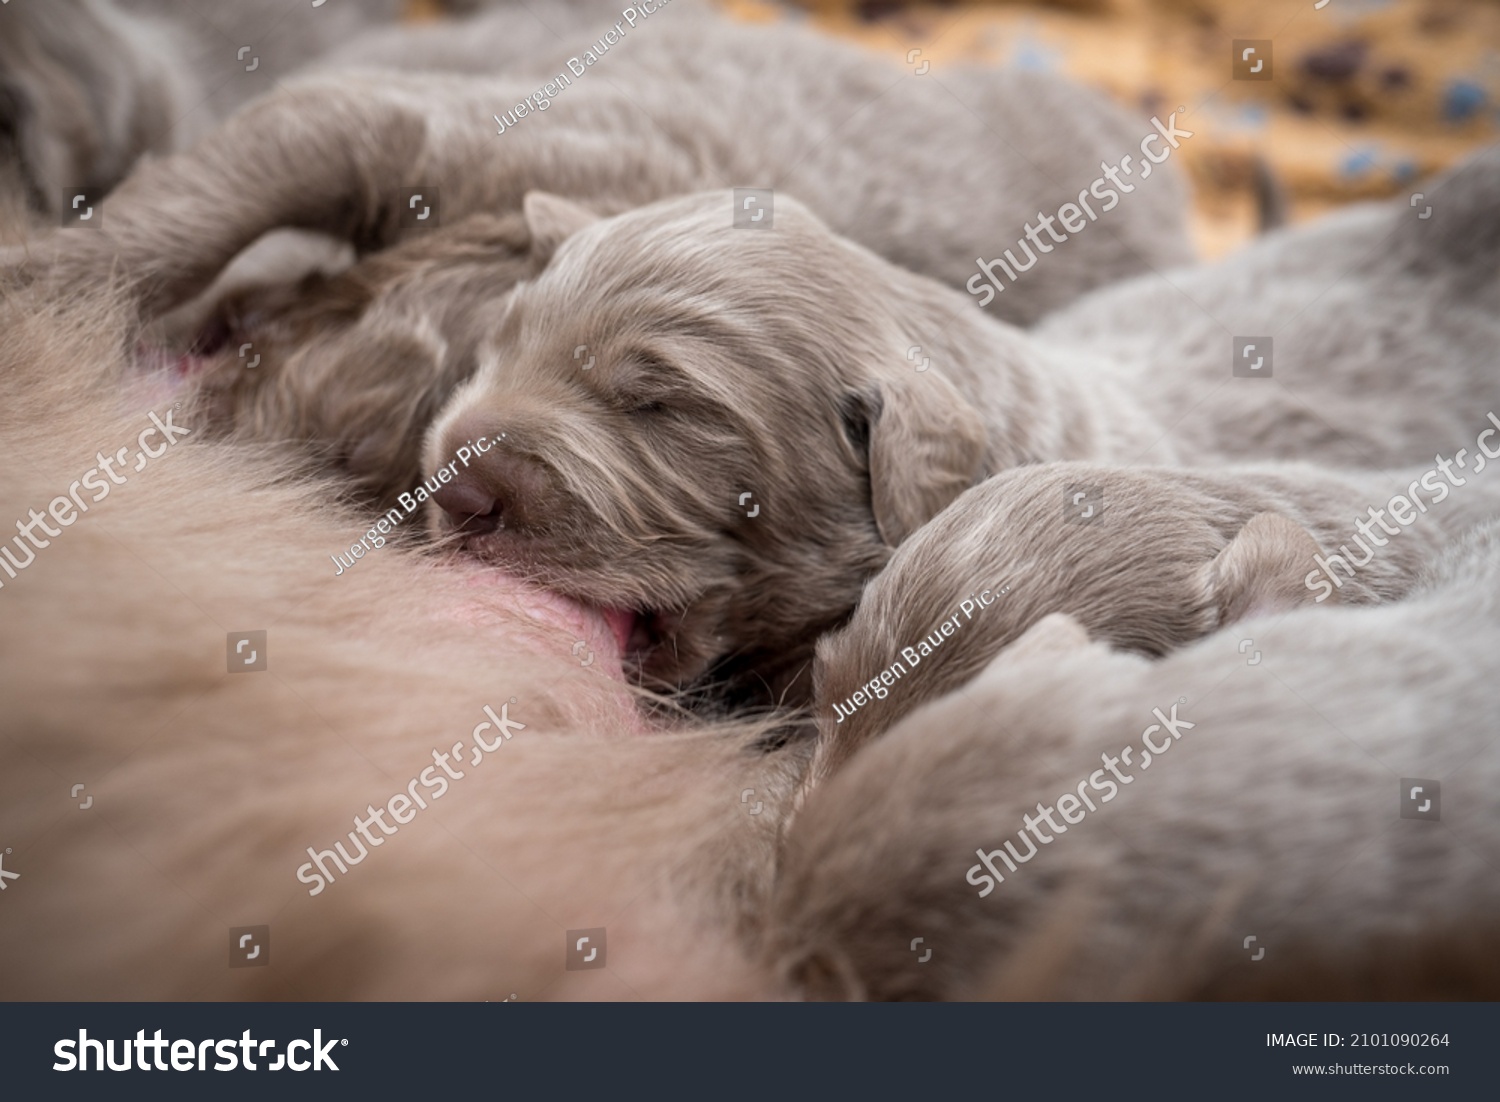 Seven newborn longhair weimaraner puppies drink at their mother dog. Small pedigree gray dogs grow up with their families. #2101090264